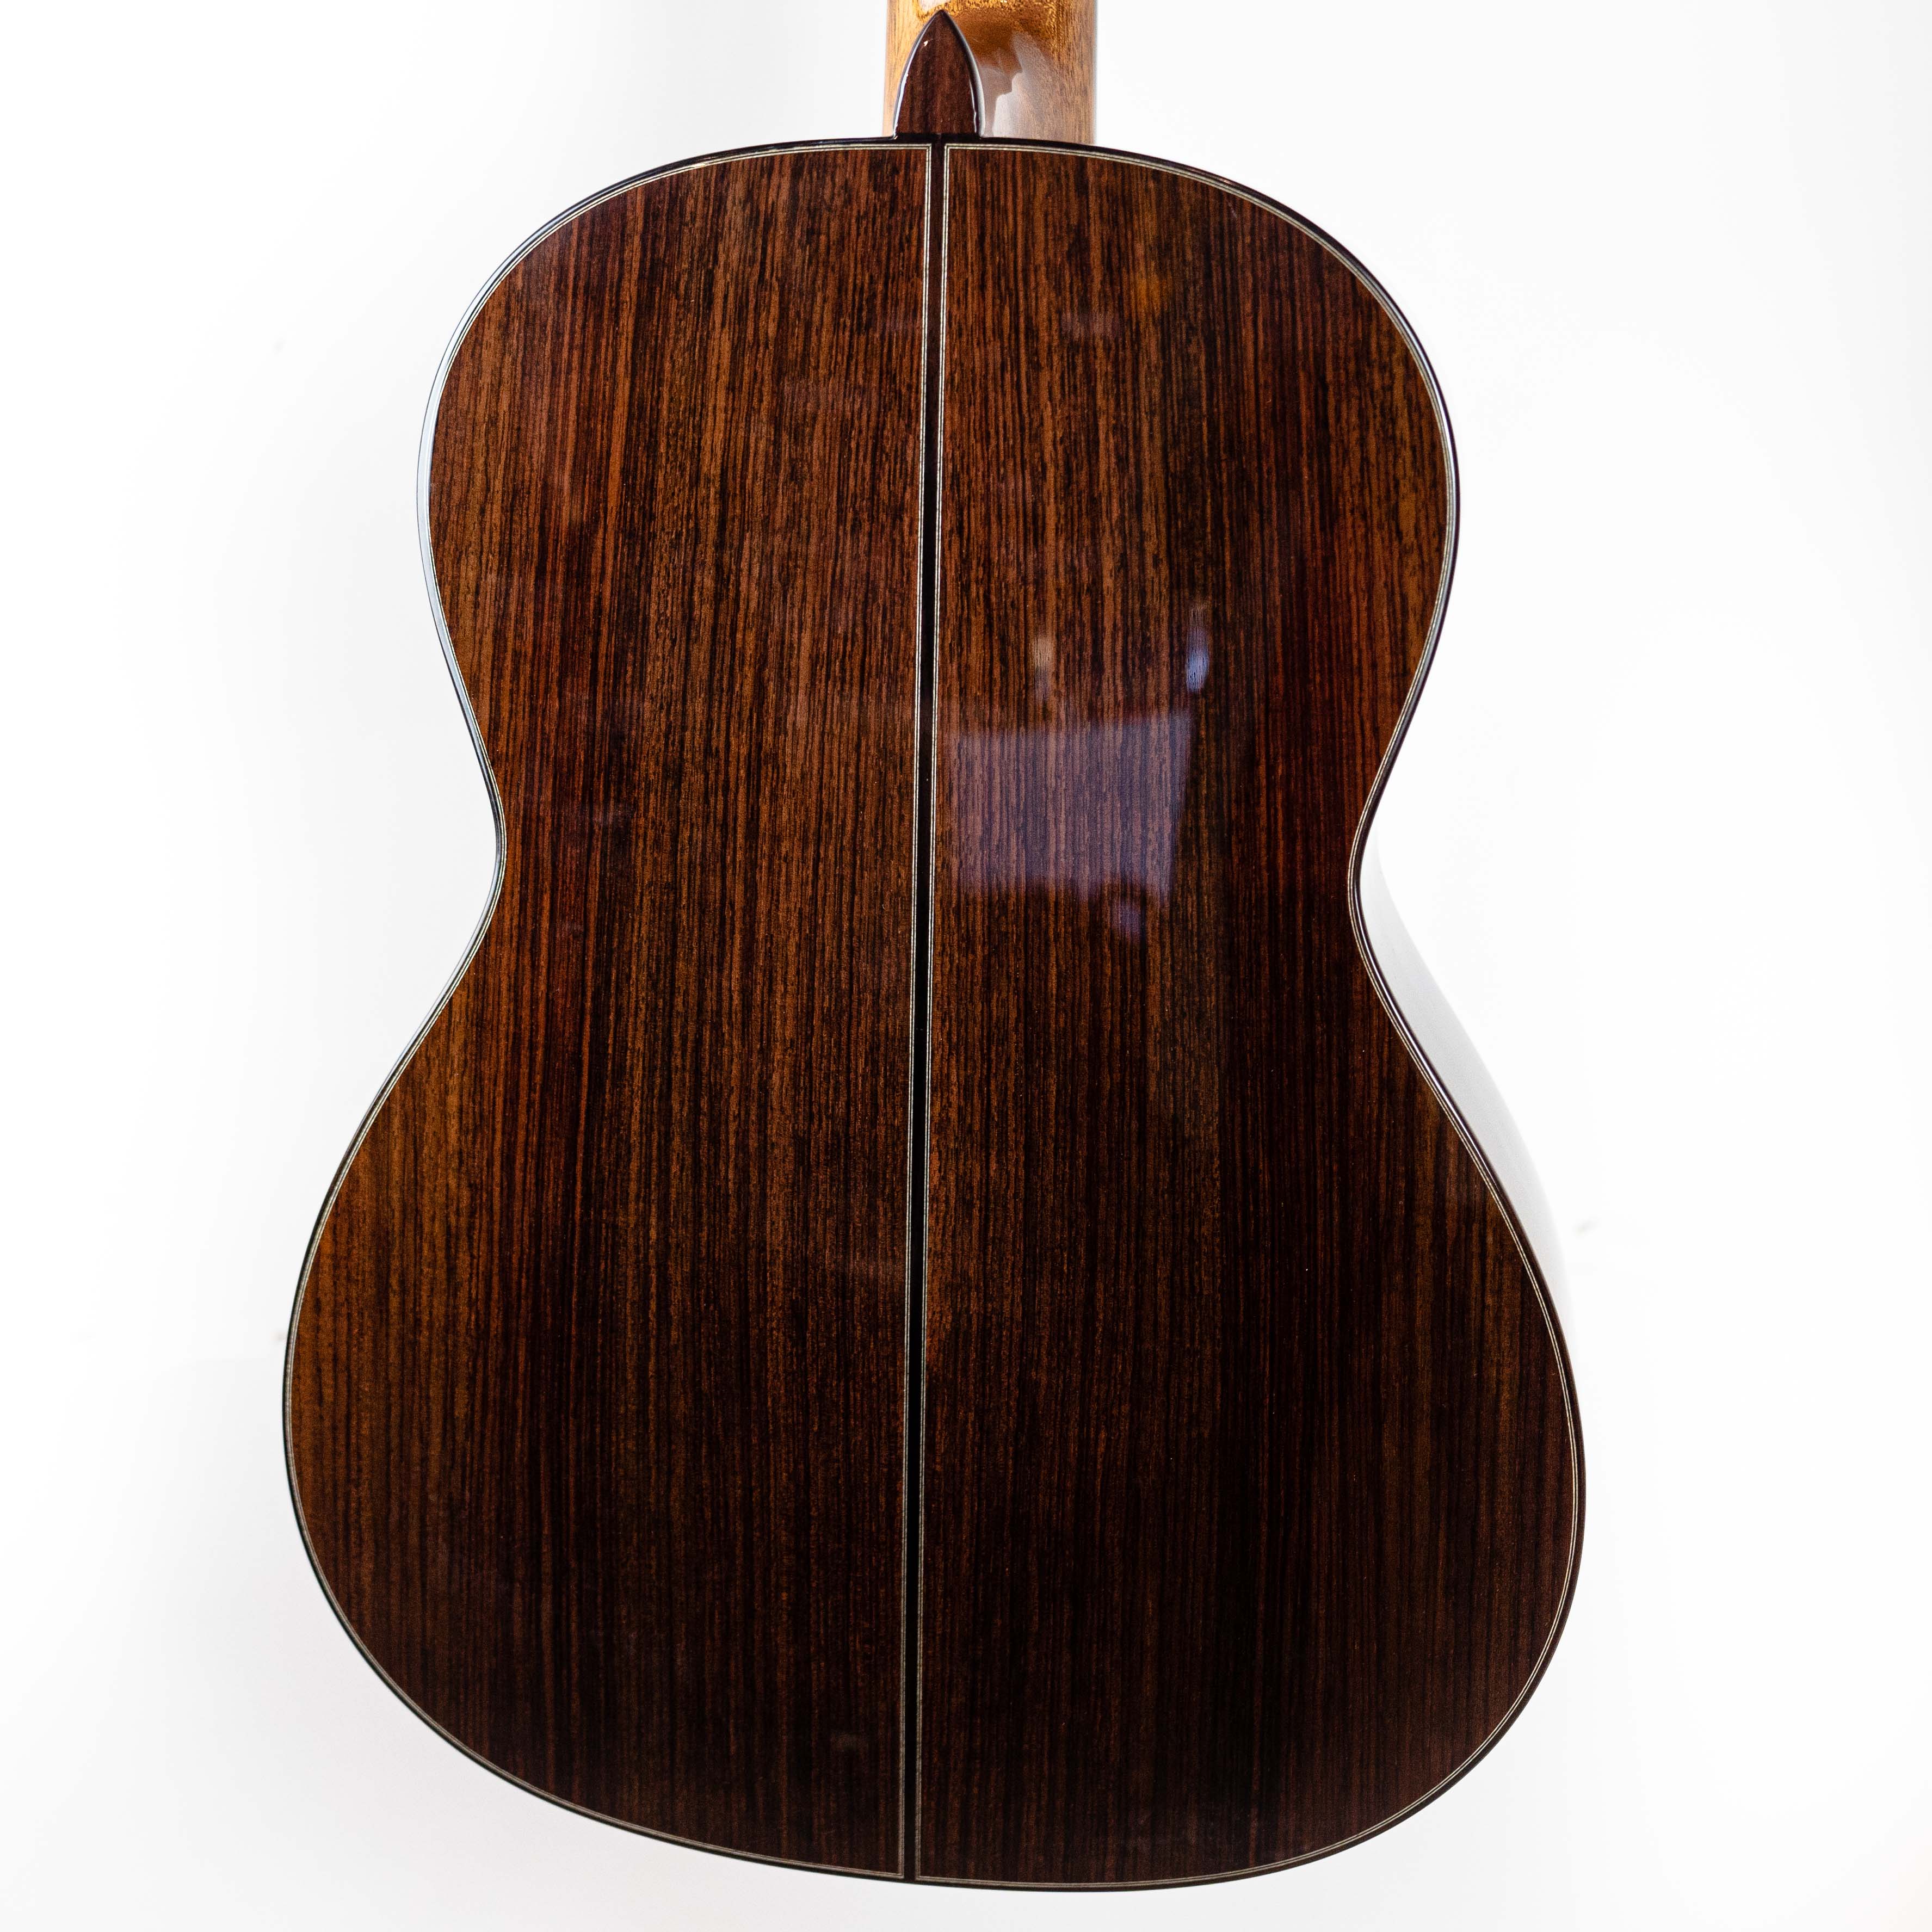 Cordoba Friederich CD Luthier Select